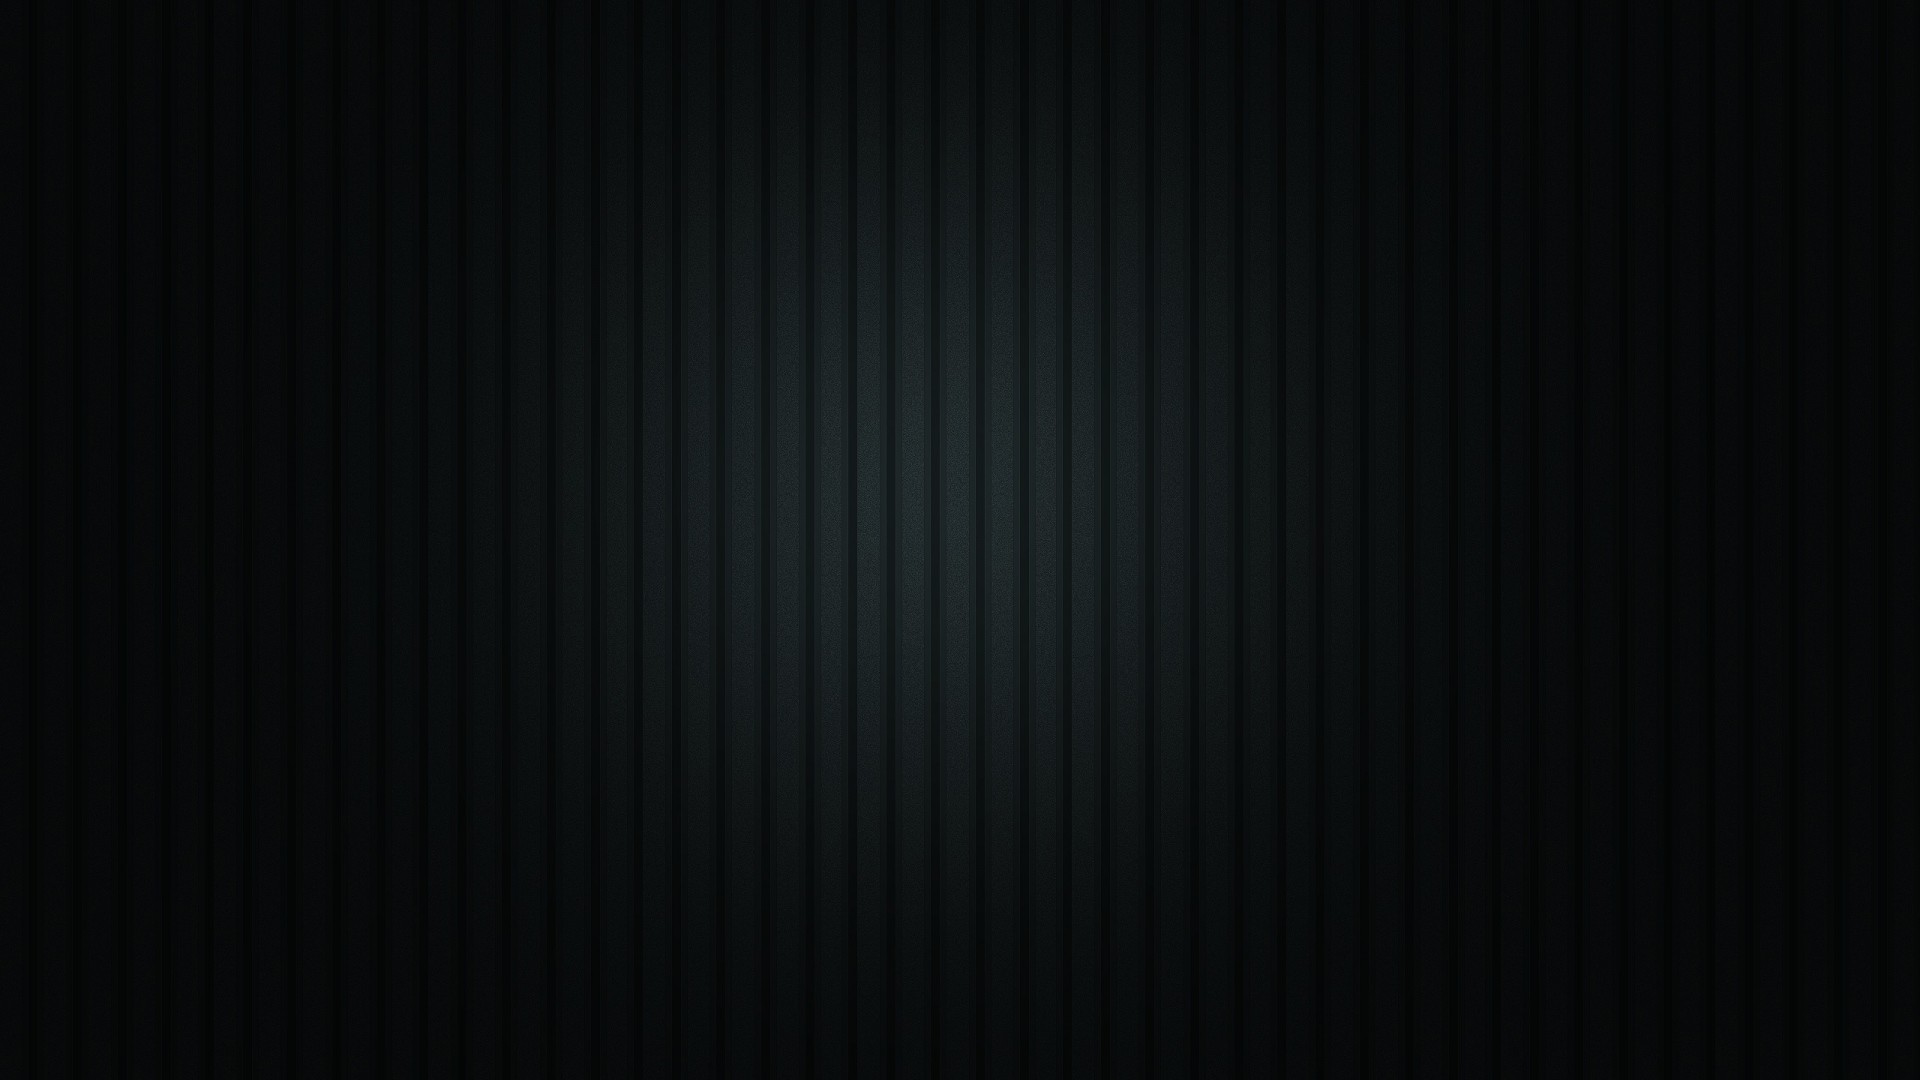  1080P Black Wallpapers on WallpaperPlay